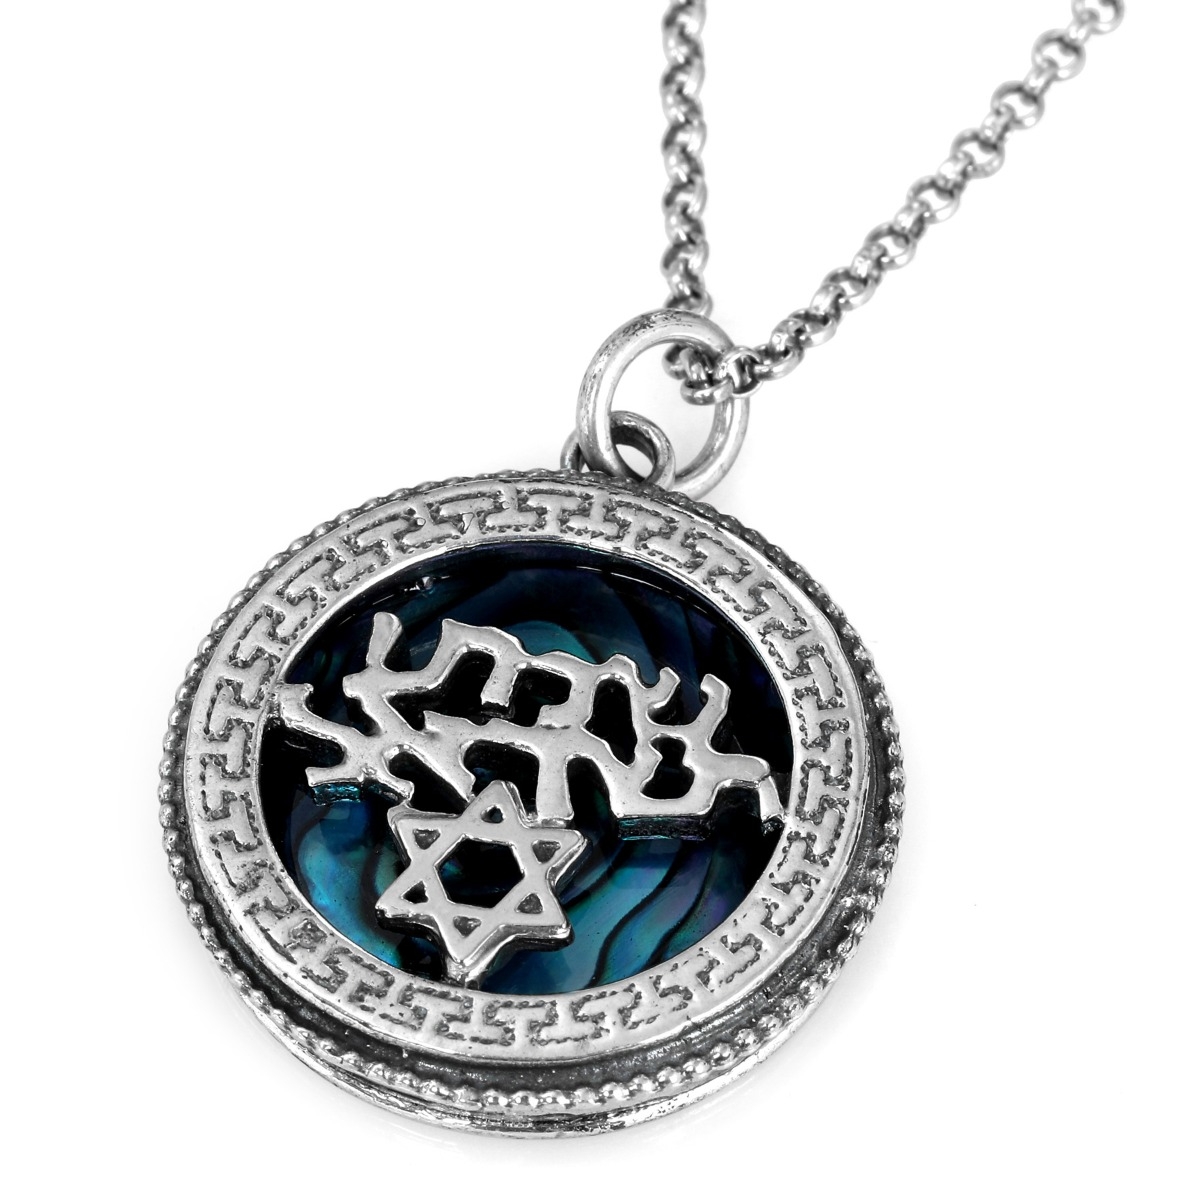 Deluxe 925 Sterling Silver Shema Yisrael Men's Necklace With Blue Seashell (Thick Pendant) - 1